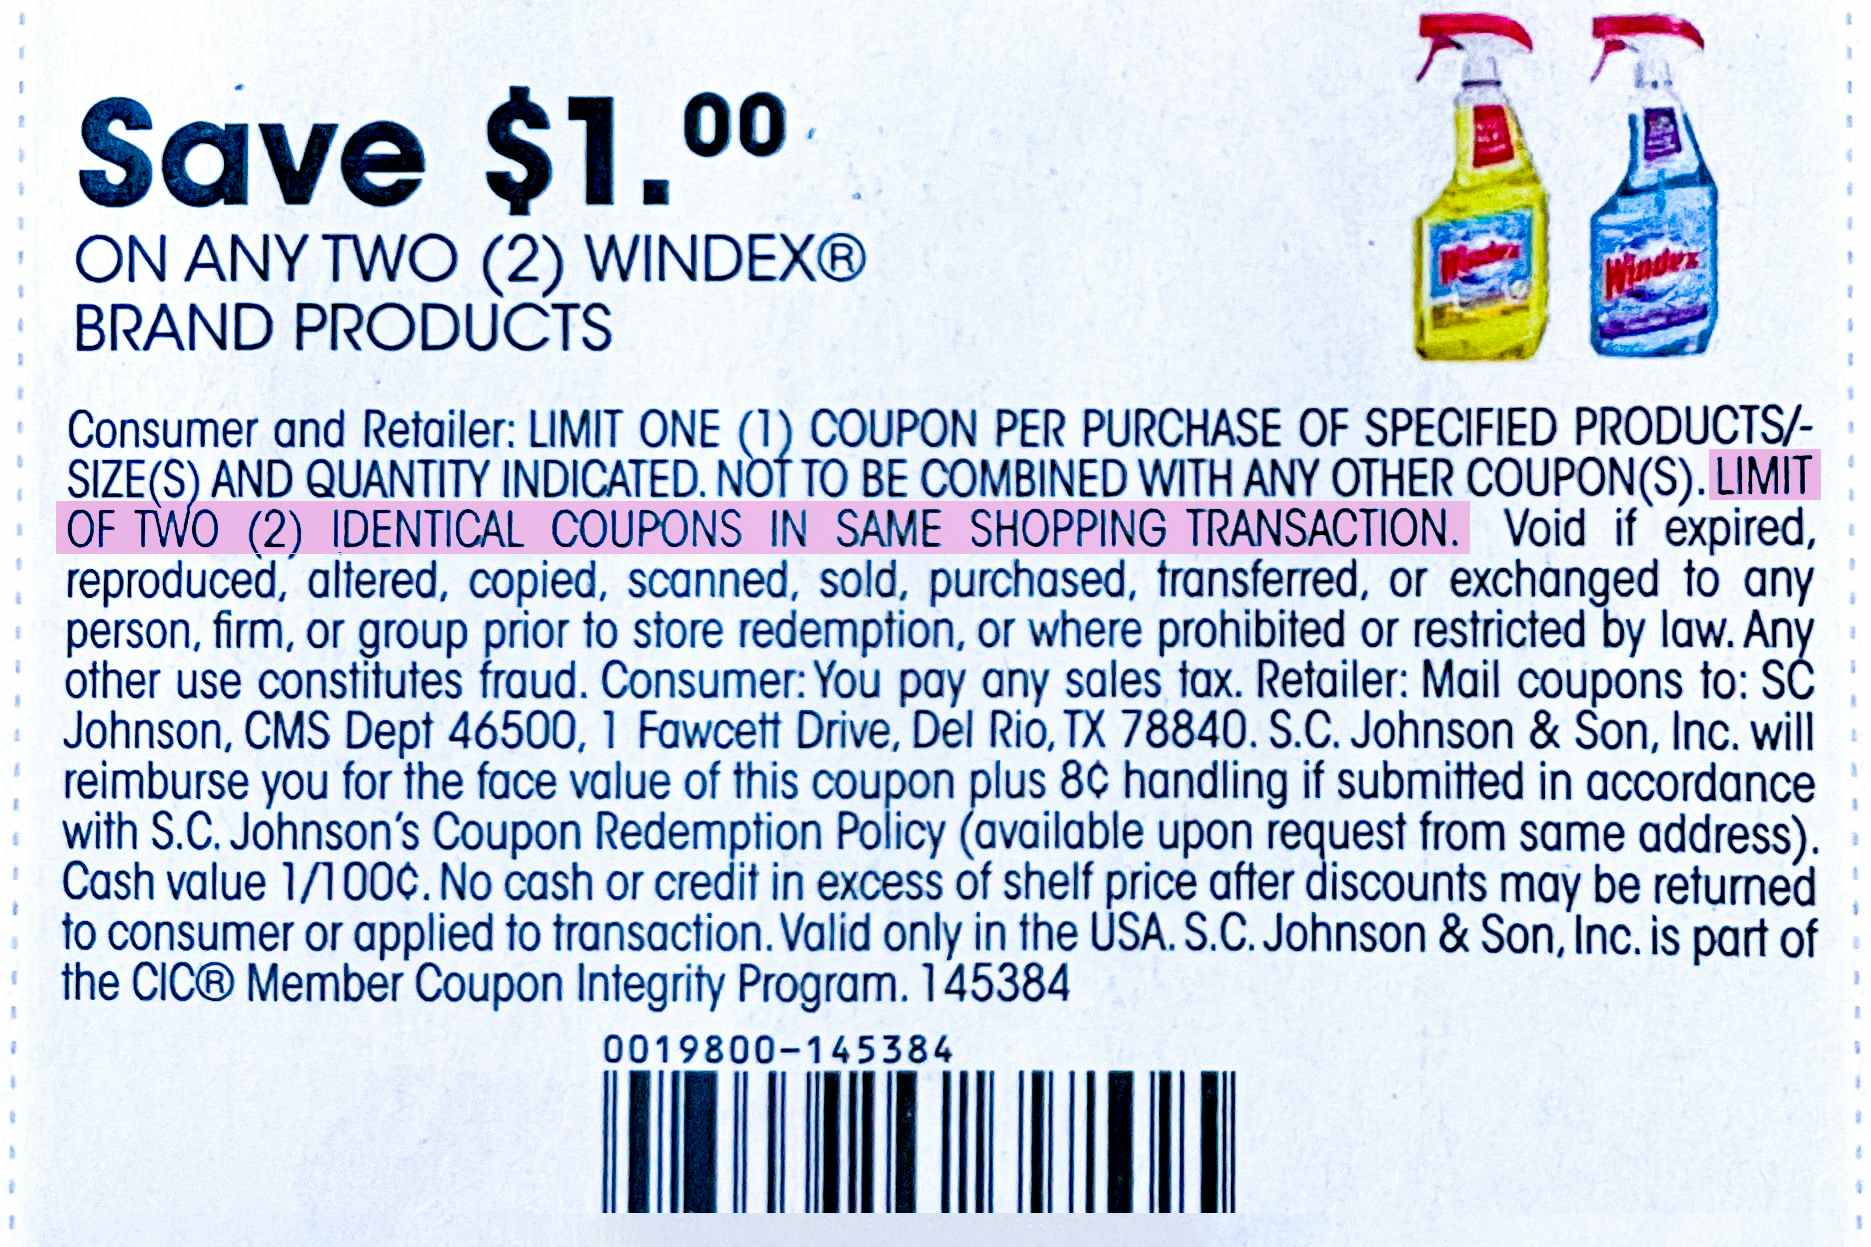 coupon-fine-print-limit-two-identical-per-transaction-reuploaded